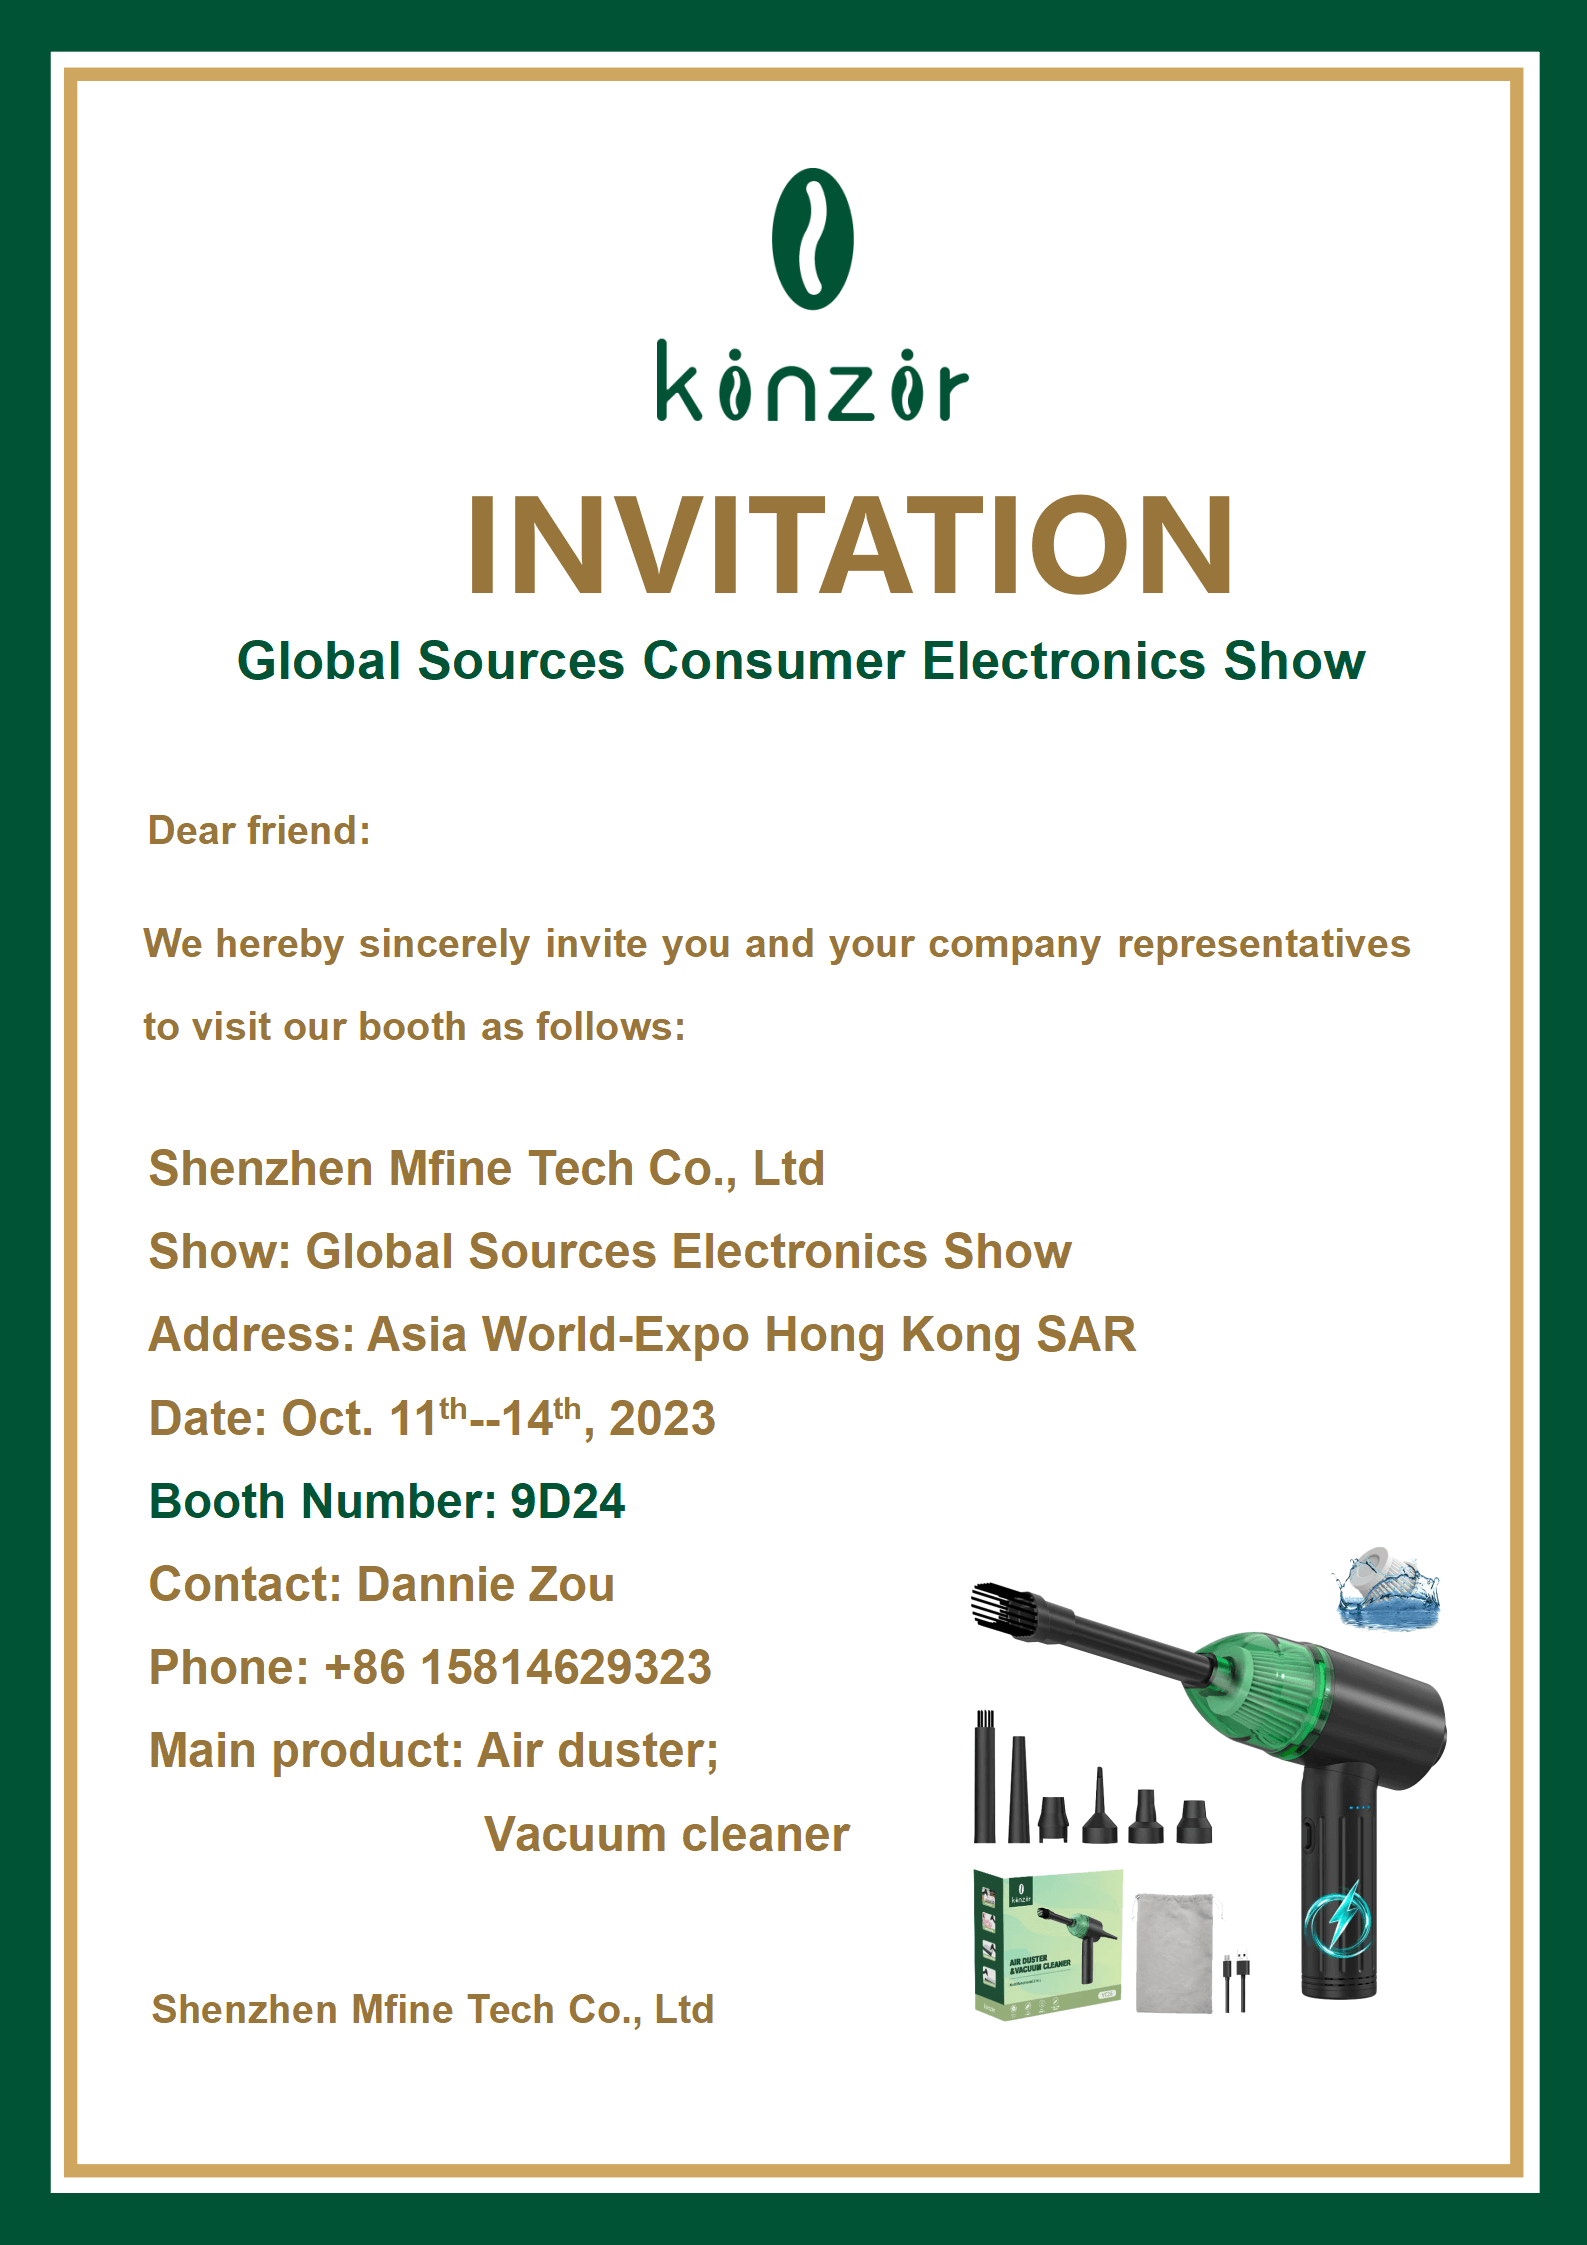 Kinzir, an Electric Air Duster Manufacturer, is to Exhibit at the Global Sources Consumer Electronics Show in Hong Kong in October 2023 - Kinzir Exhibition - 1